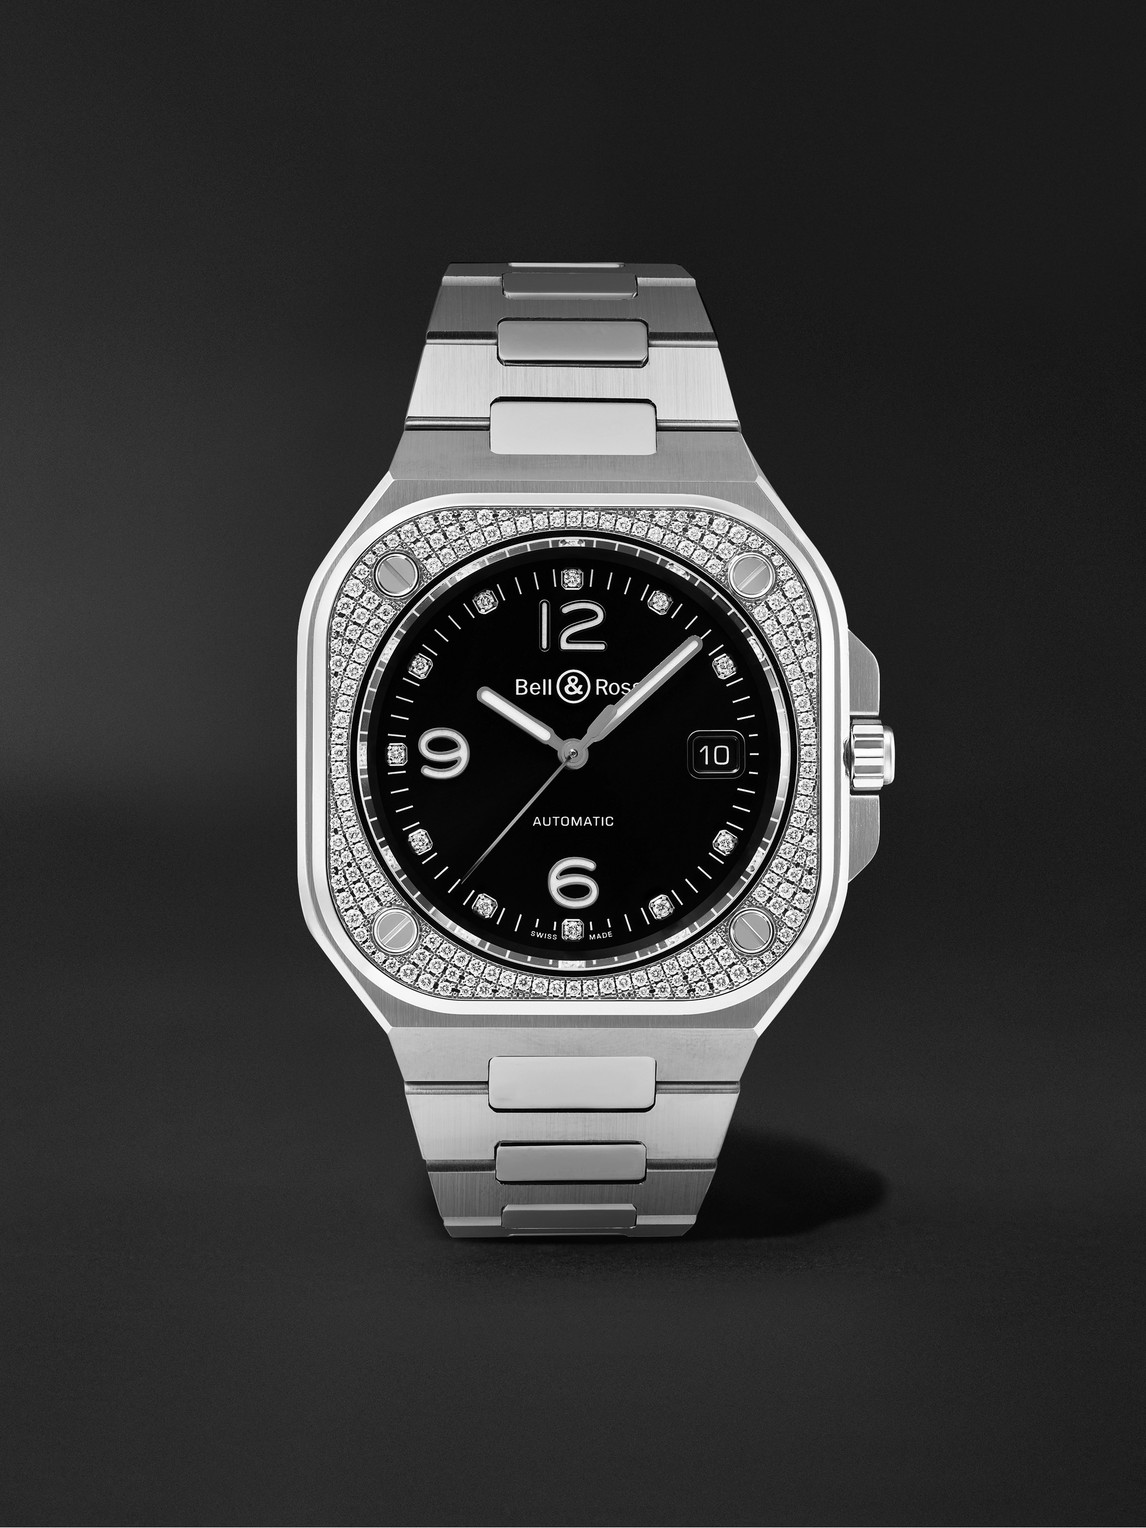 Bell & Ross Br 05 Automatic 40mm Stainless Steel And Diamond Watch, Ref. No. Br05a-bl-stfld/sst In Black